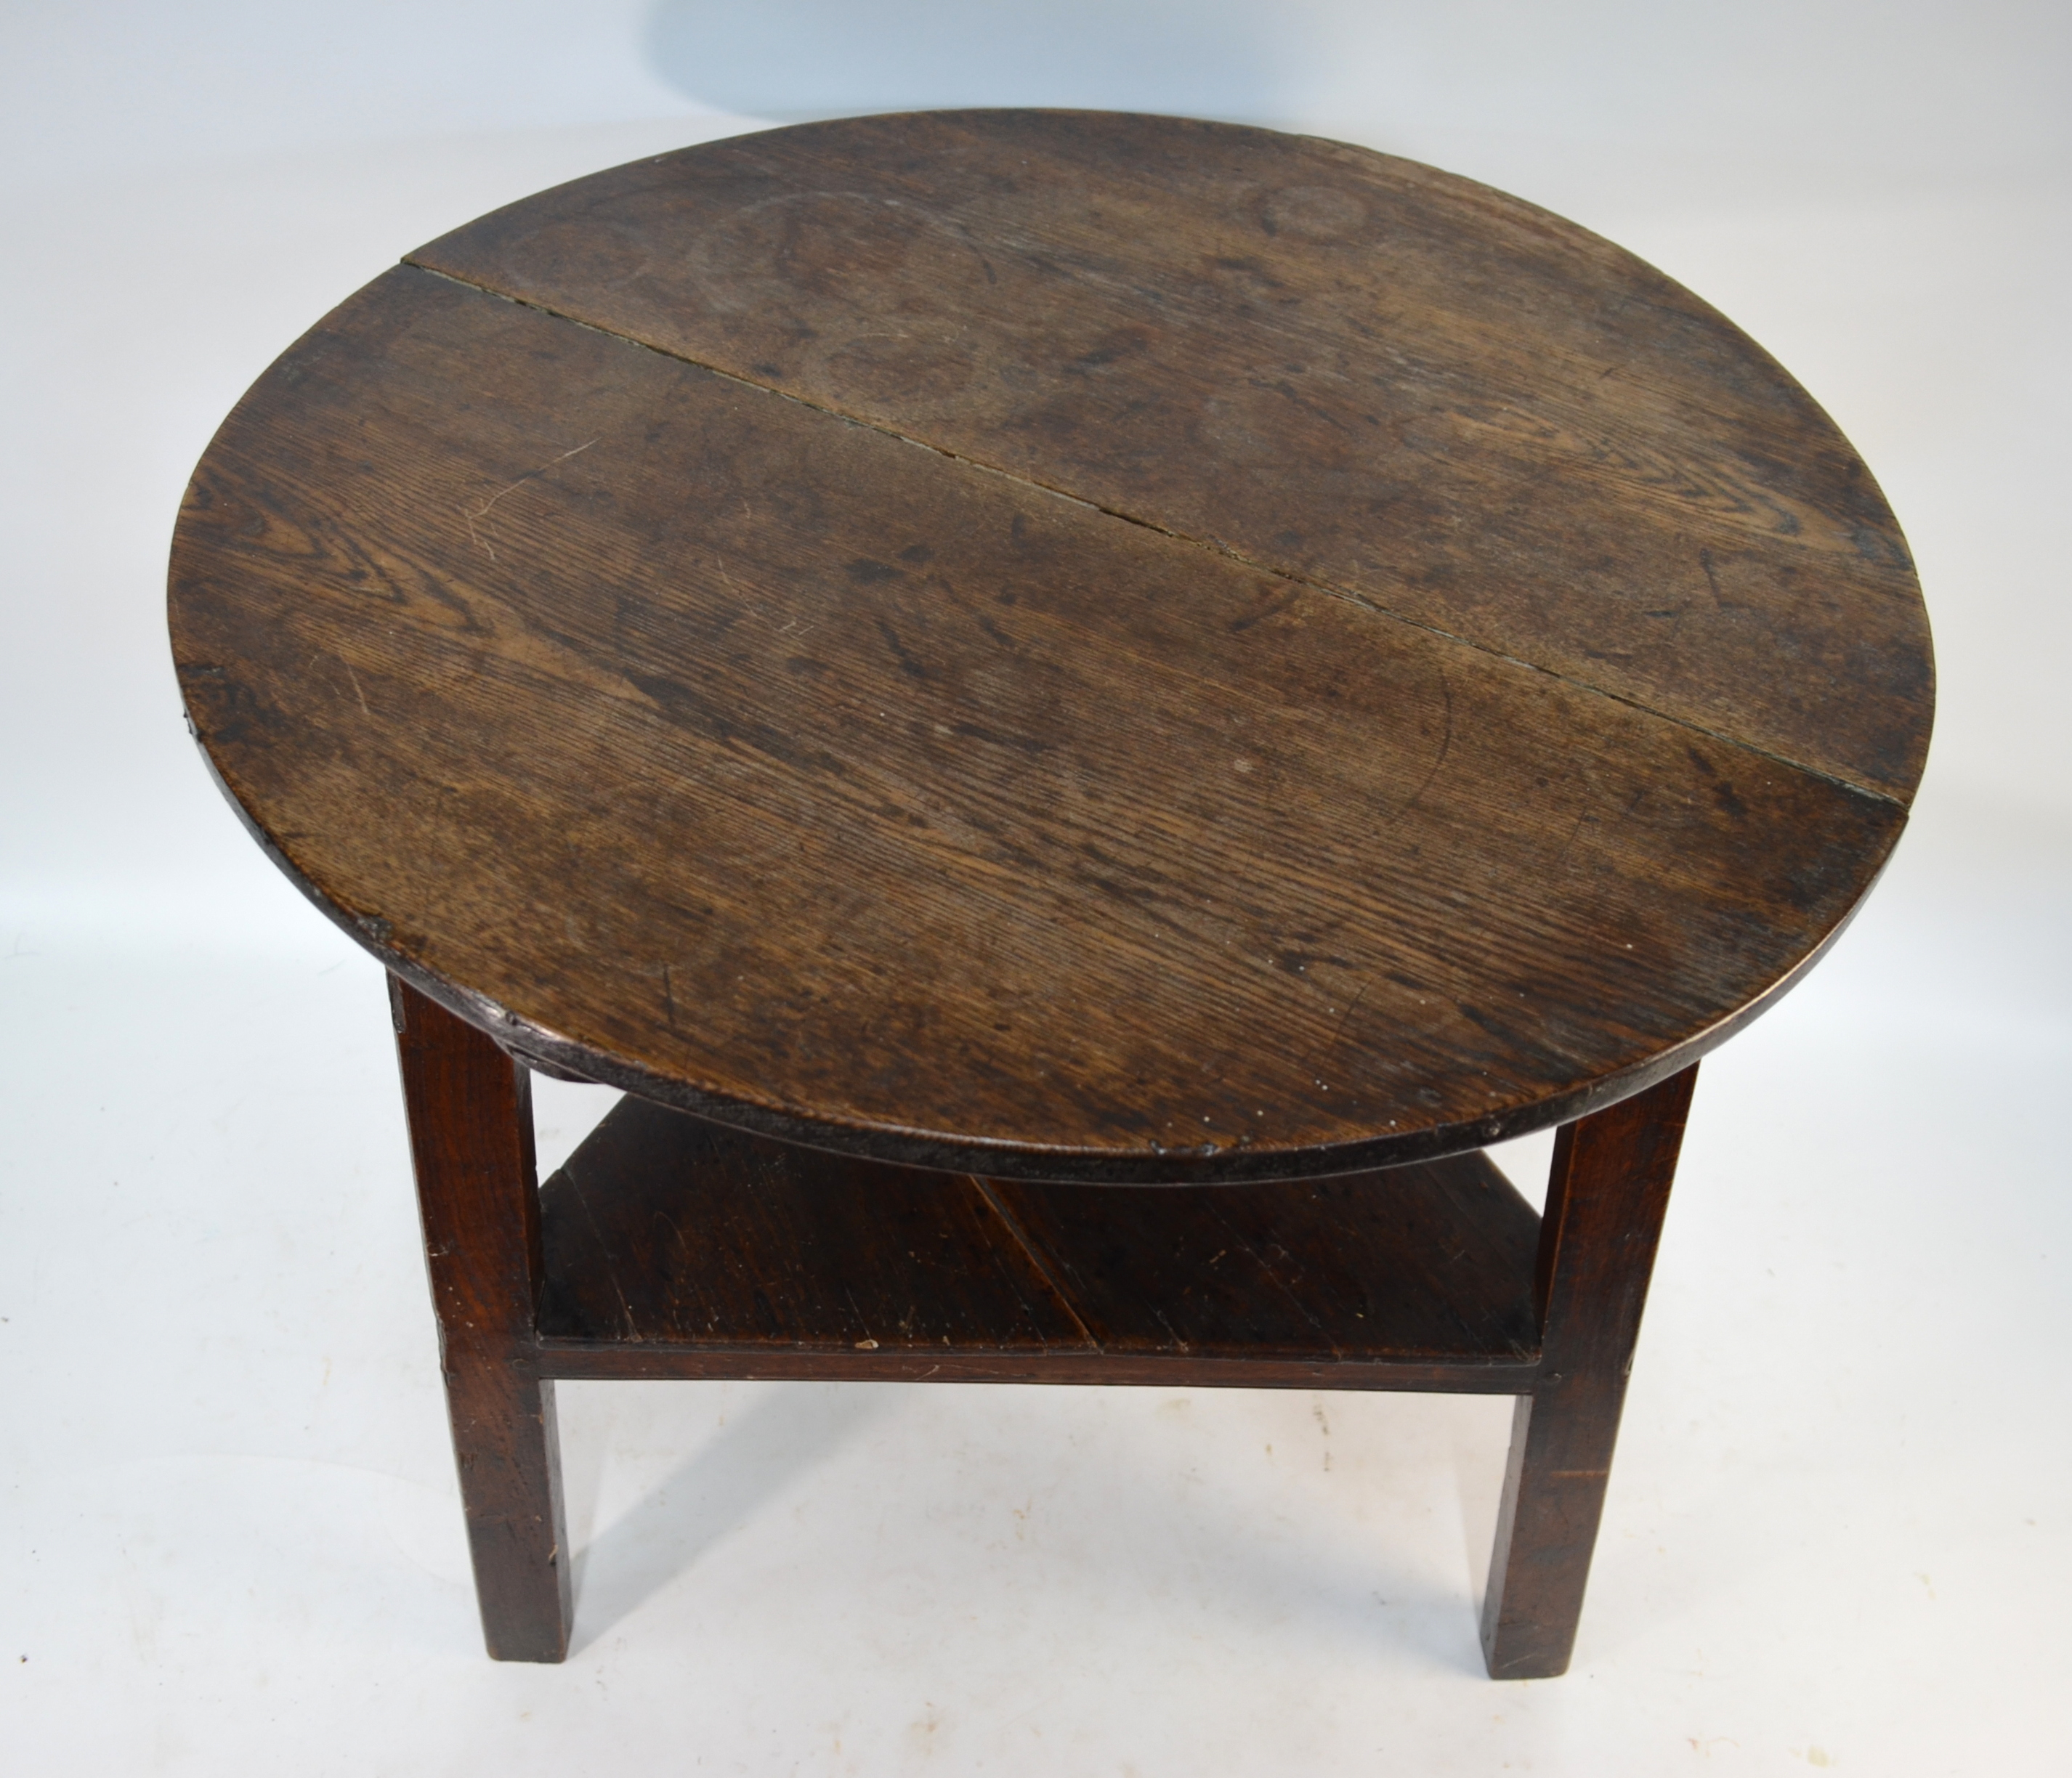 An 18th century oak cricket table, the two plank circular top raised on triangular legs united by - Image 2 of 2